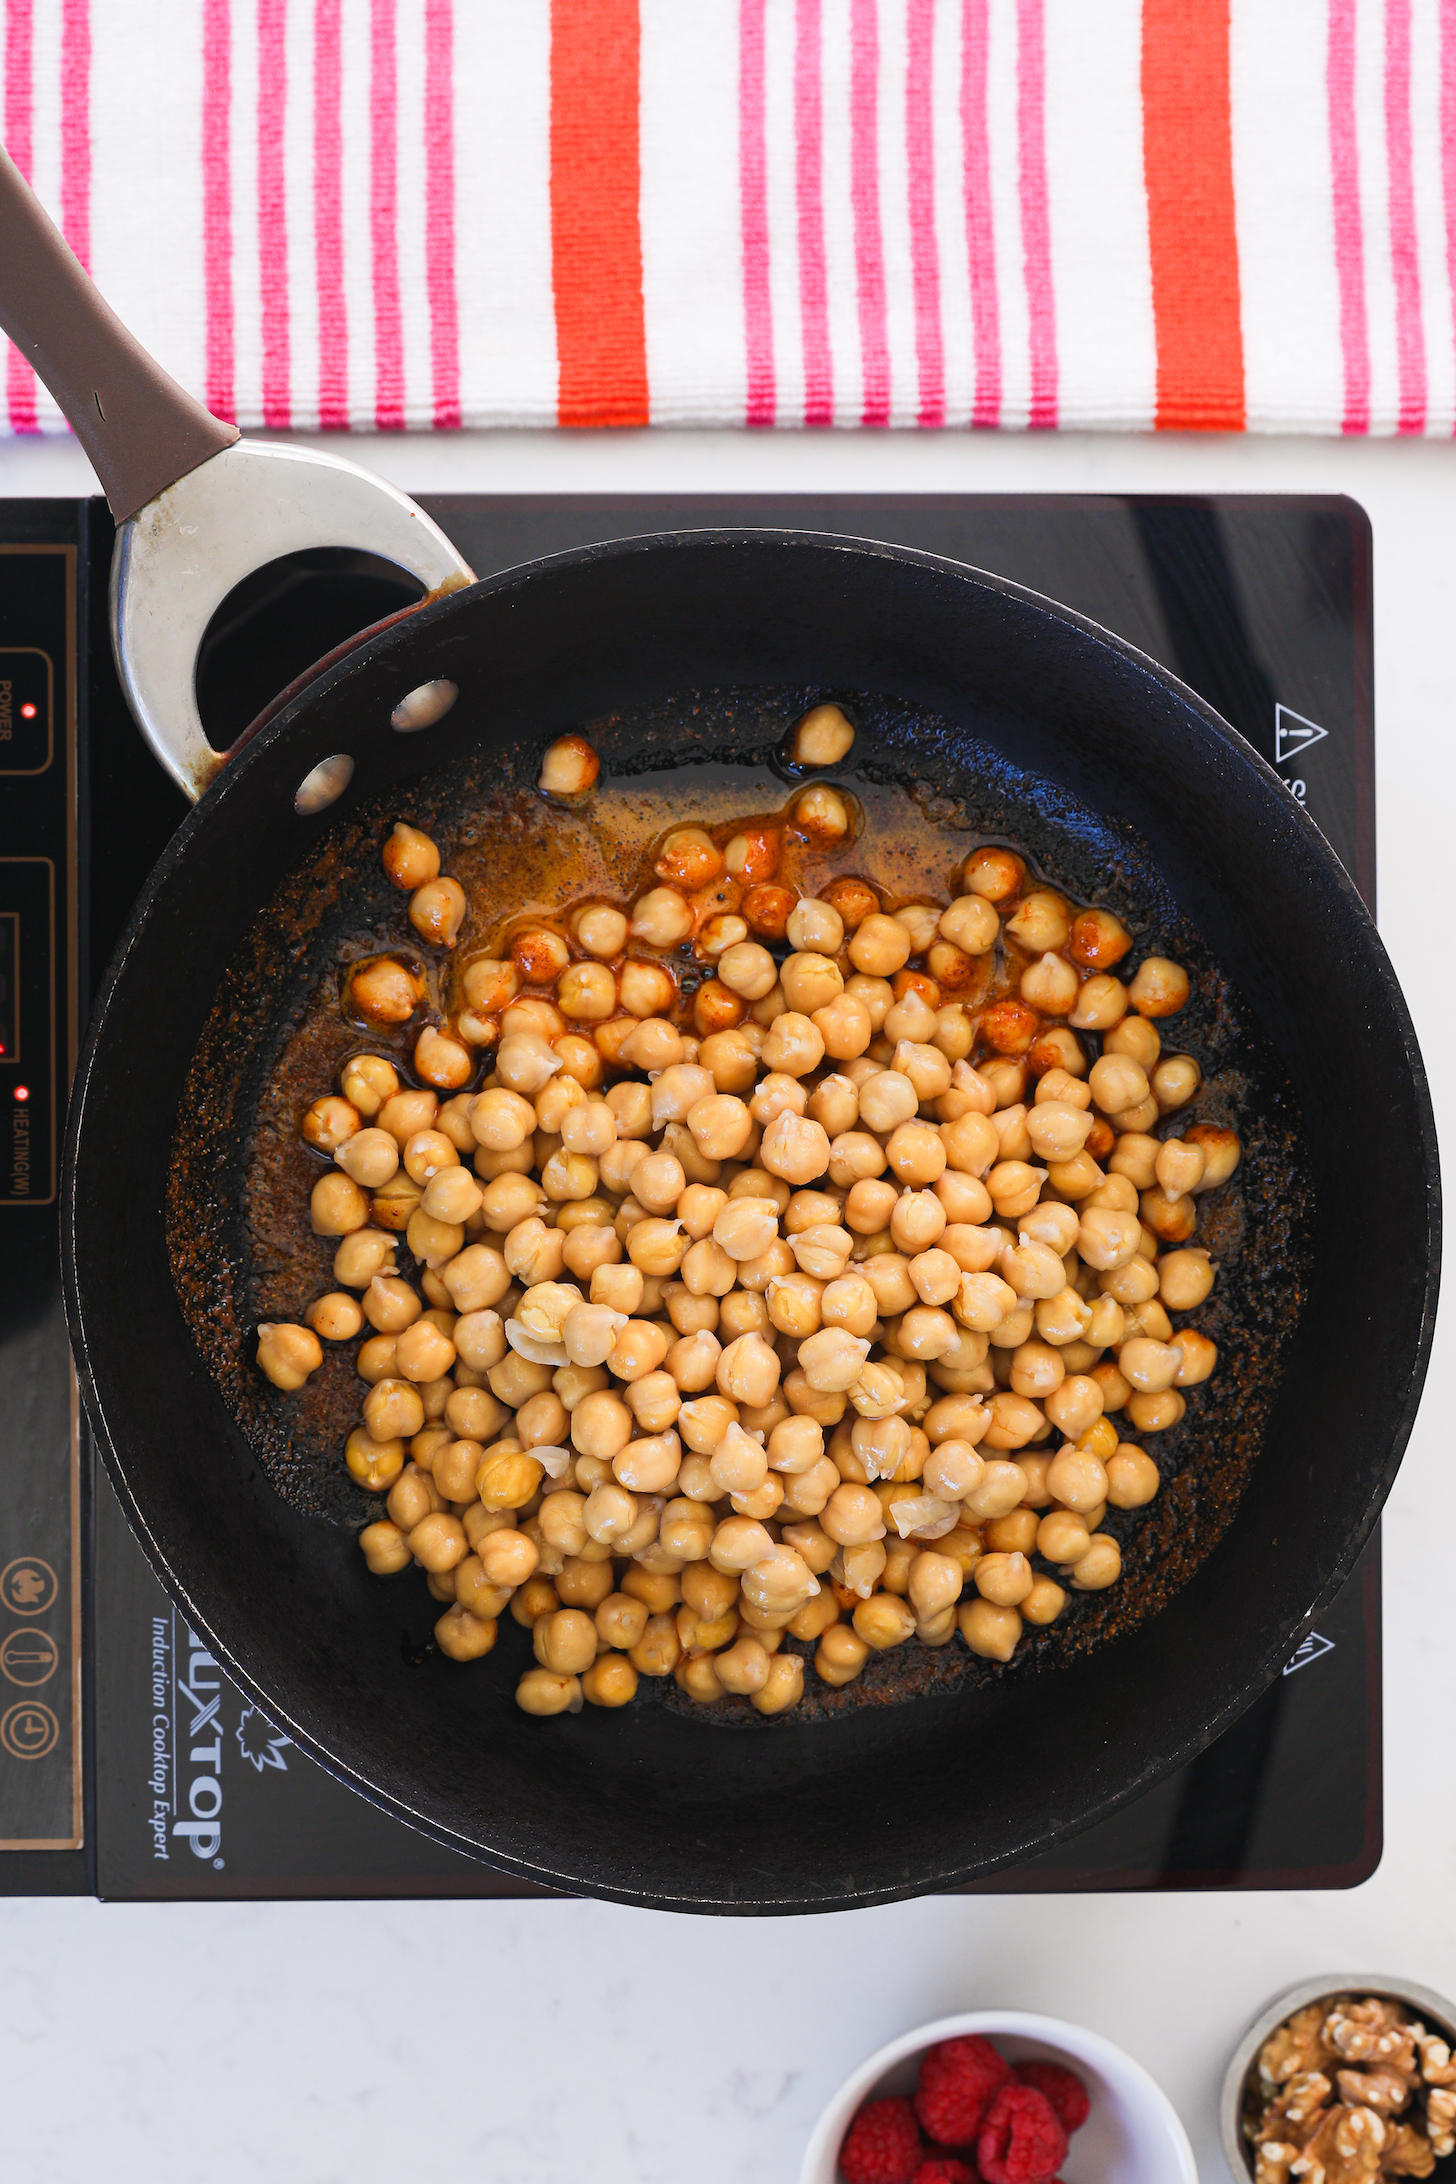 A pan of chickpeas on a cooktop.